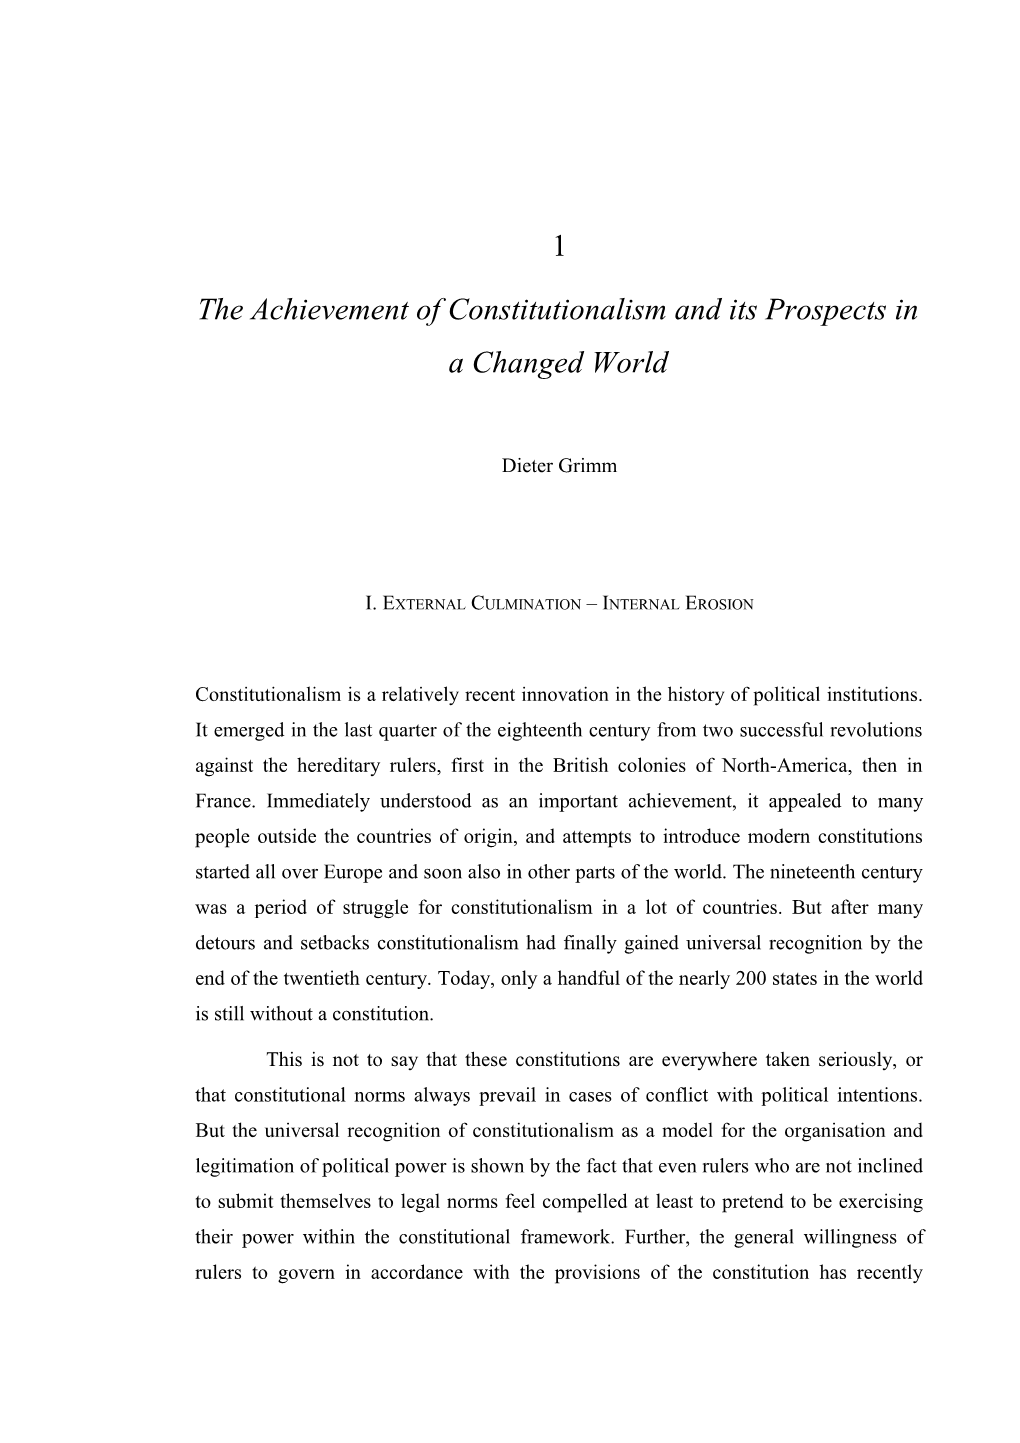 The Achievement of Constitutionalism and Its Prospects in a Changed World